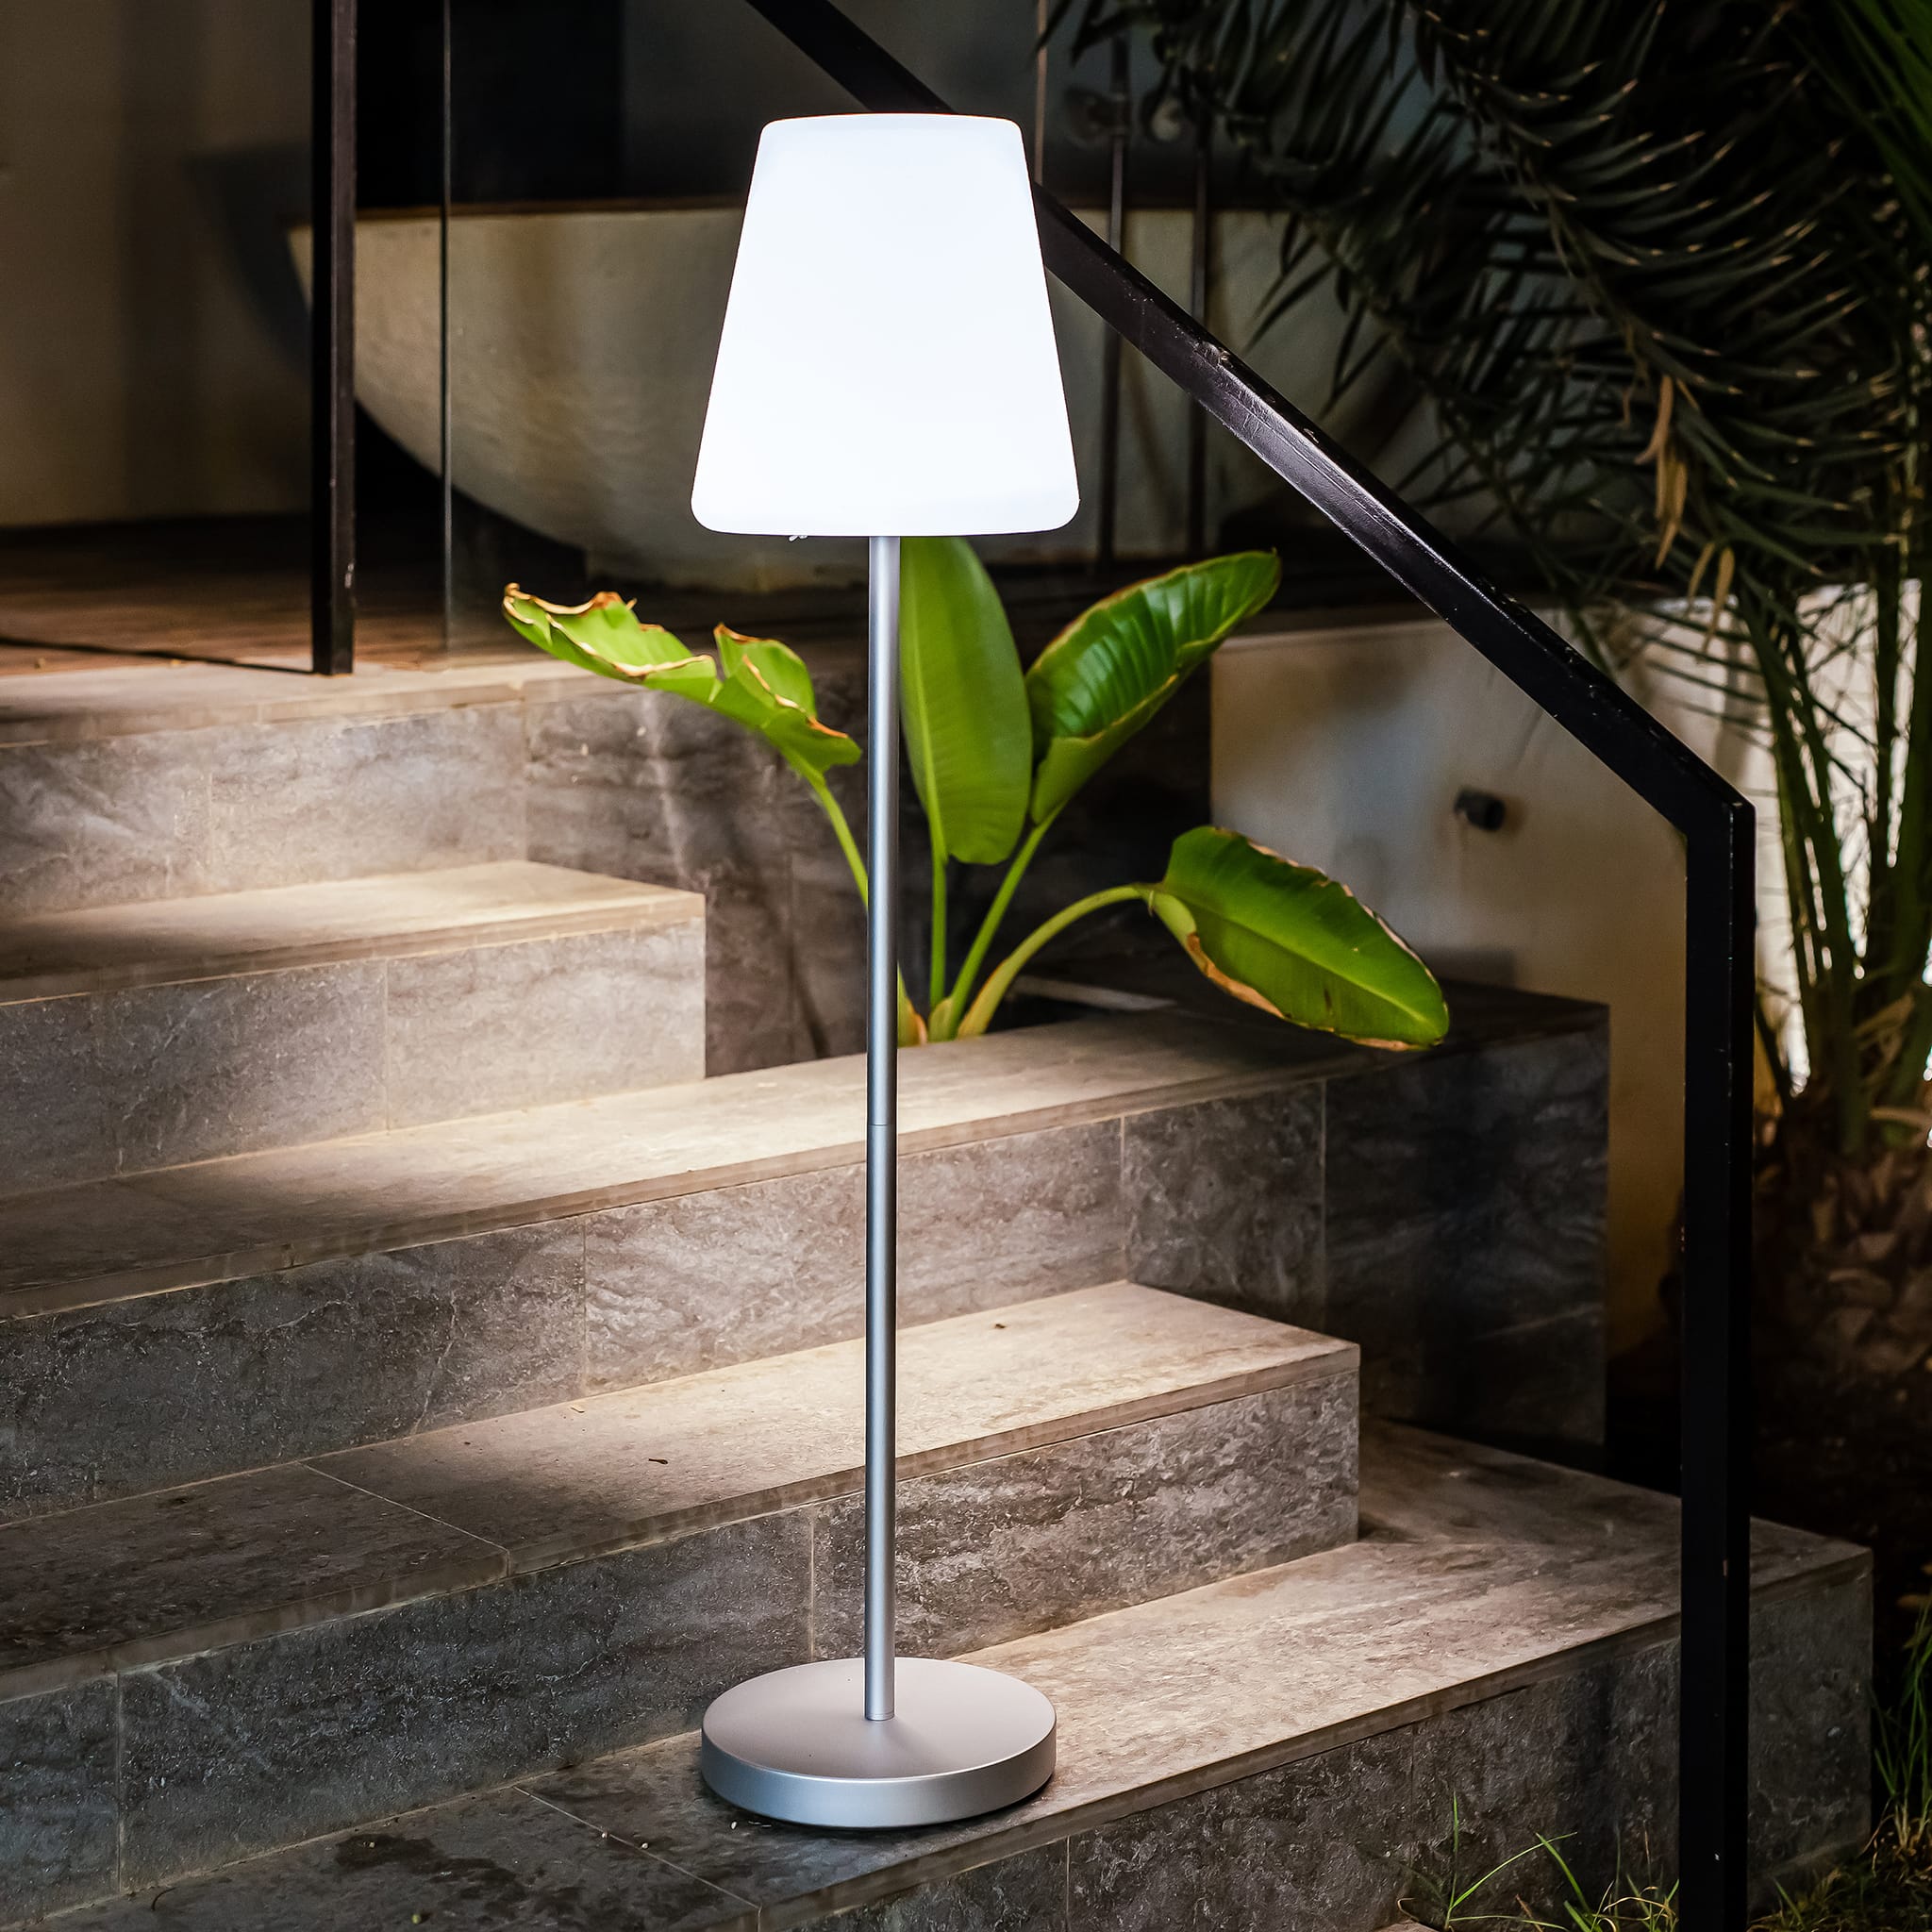 Lola Slim 120: a distinguished LED lamp, blending sleek design with versatile outdoor and indoor functionality, and weather-resistant build.